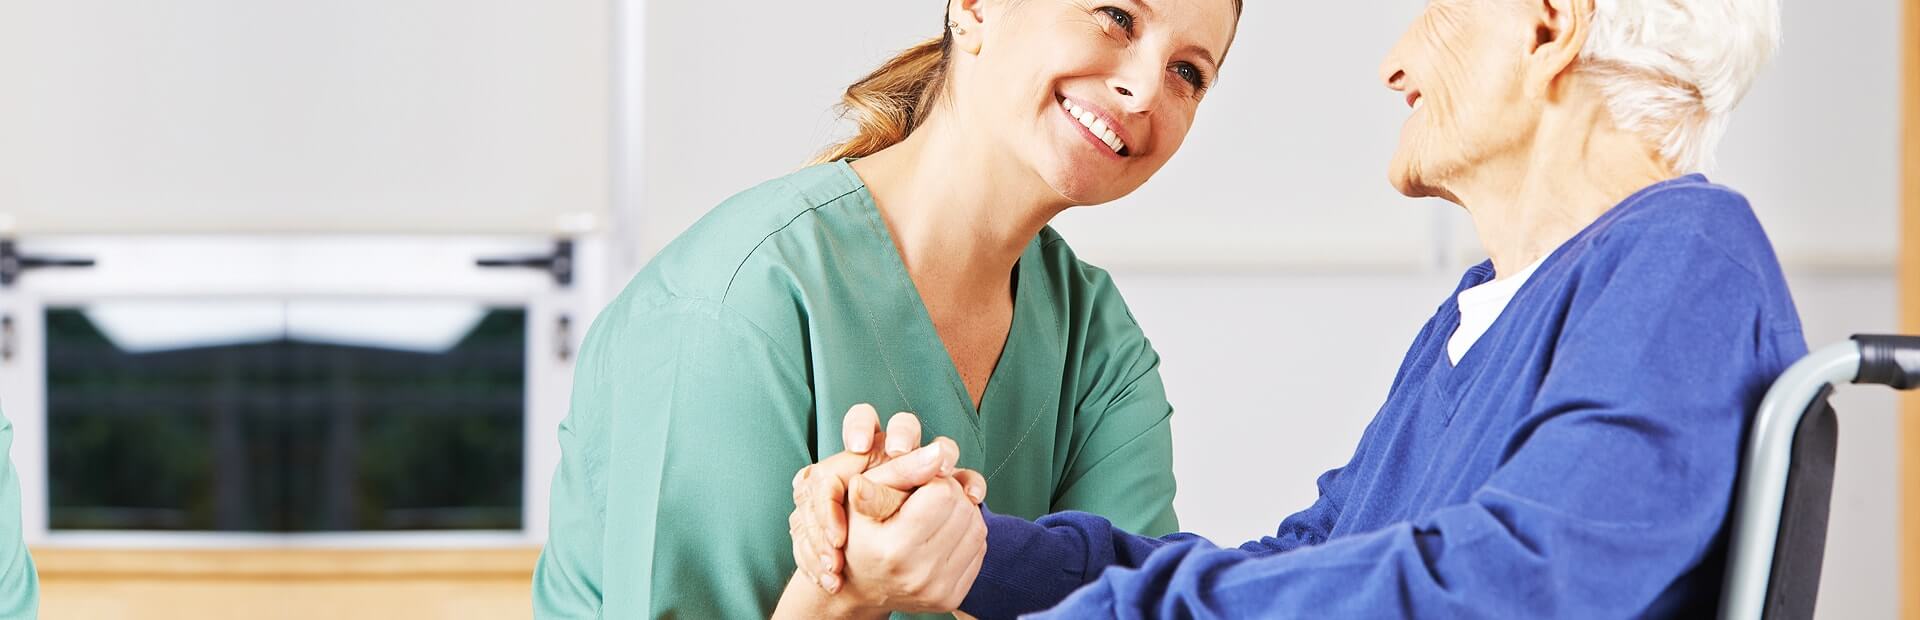 Priory Care Services | Home Care Services in Croydon